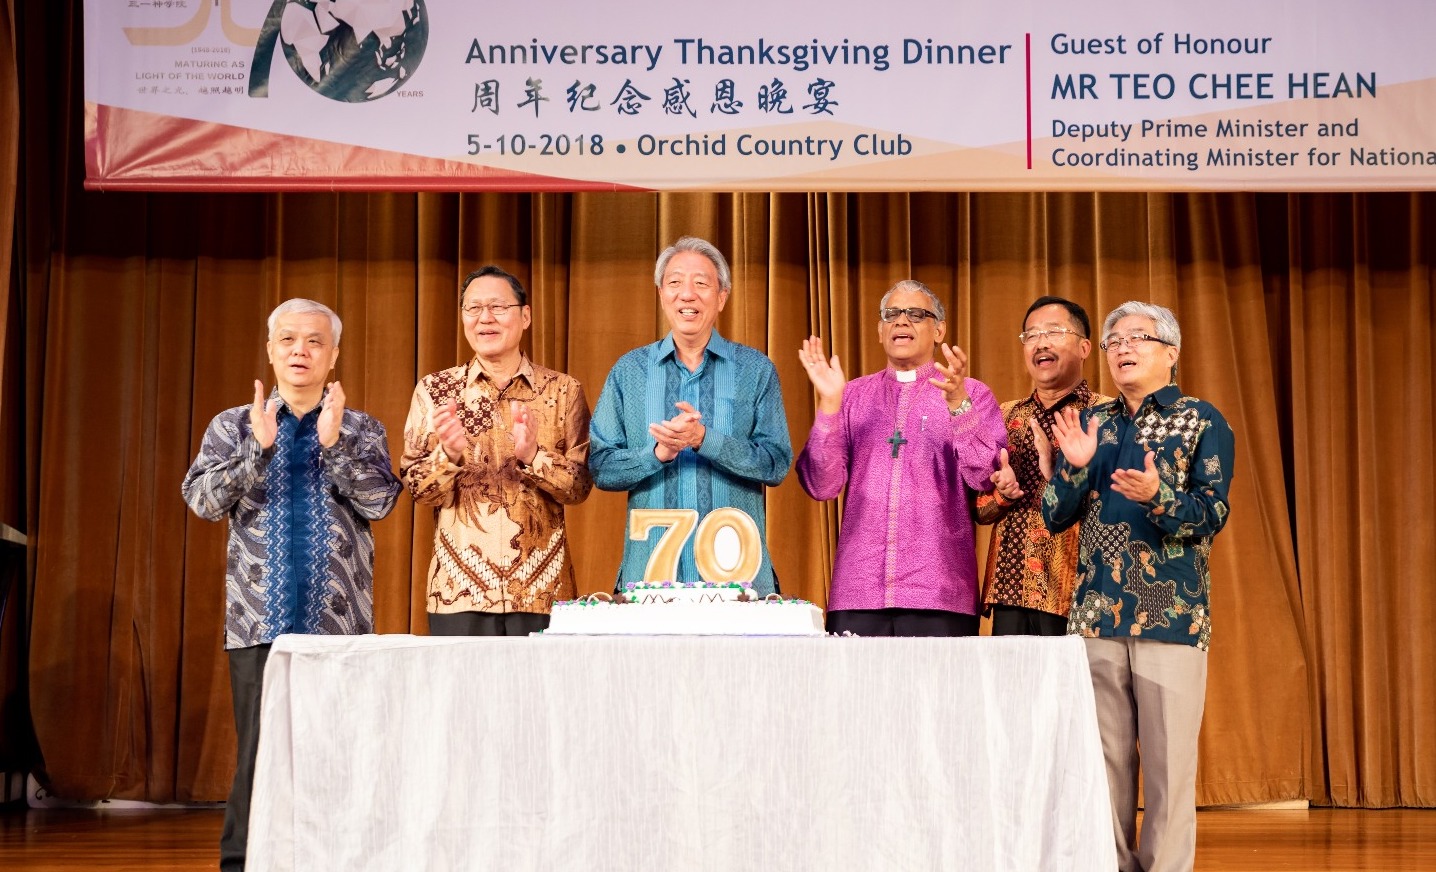 Rev Dr Ngoei (second from left) has been at the helm of TTC for almost 20 out of the 72 years since it was founded in 1948. Deputy Prime Minister Teo Chee Hean was the Guest-Of-Honour at the college's 70th anniversary celebrations. 